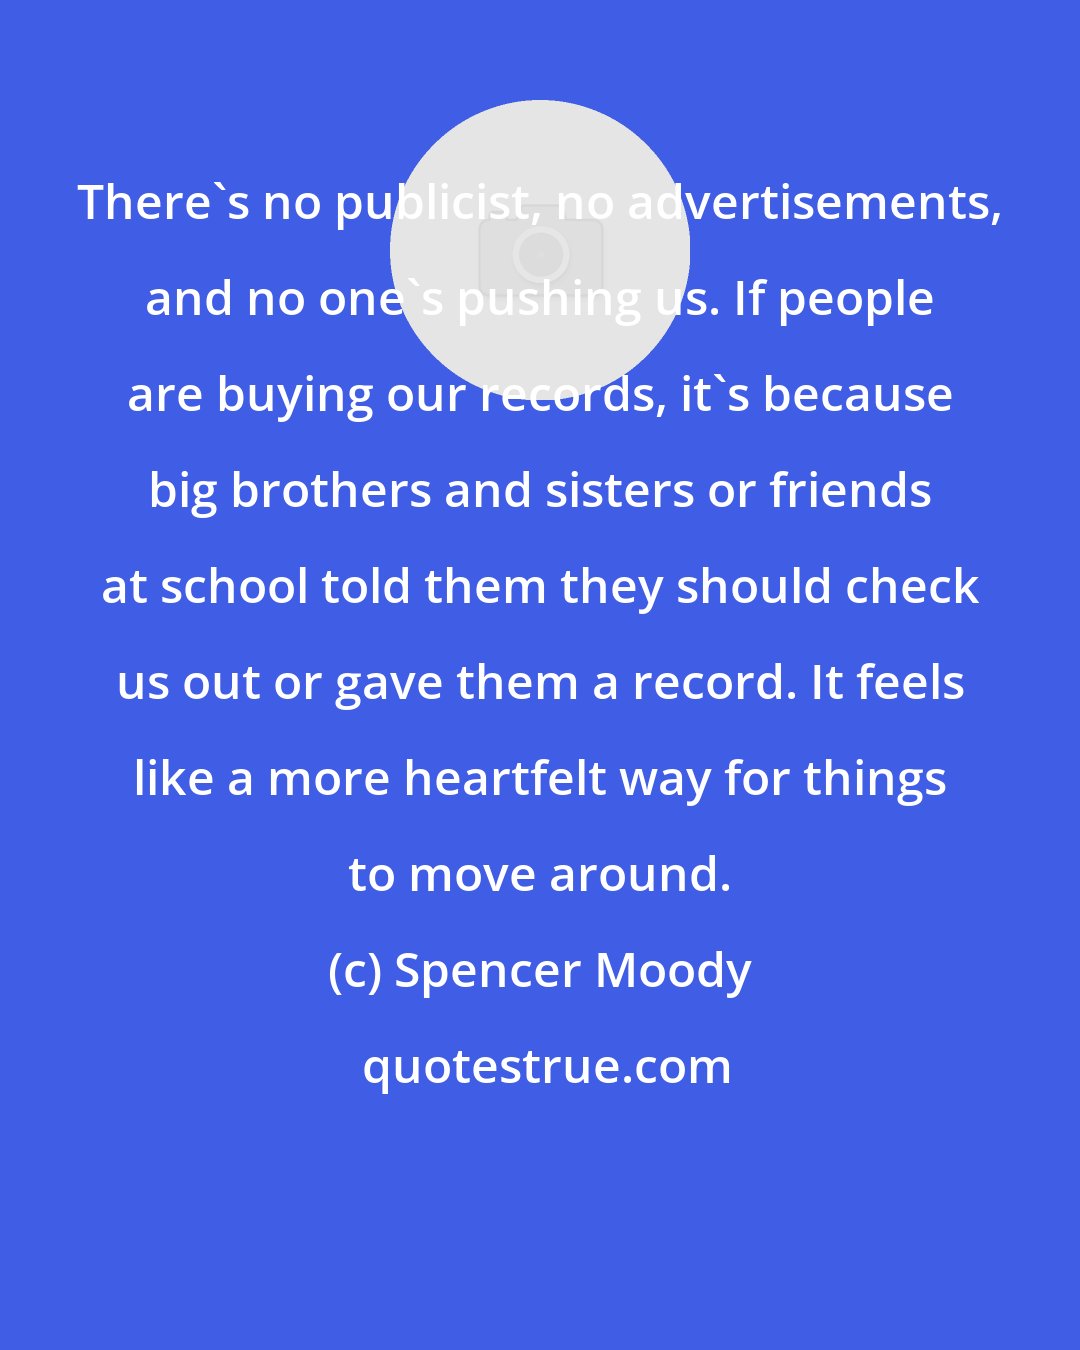 Spencer Moody: There's no publicist, no advertisements, and no one's pushing us. If people are buying our records, it's because big brothers and sisters or friends at school told them they should check us out or gave them a record. It feels like a more heartfelt way for things to move around.